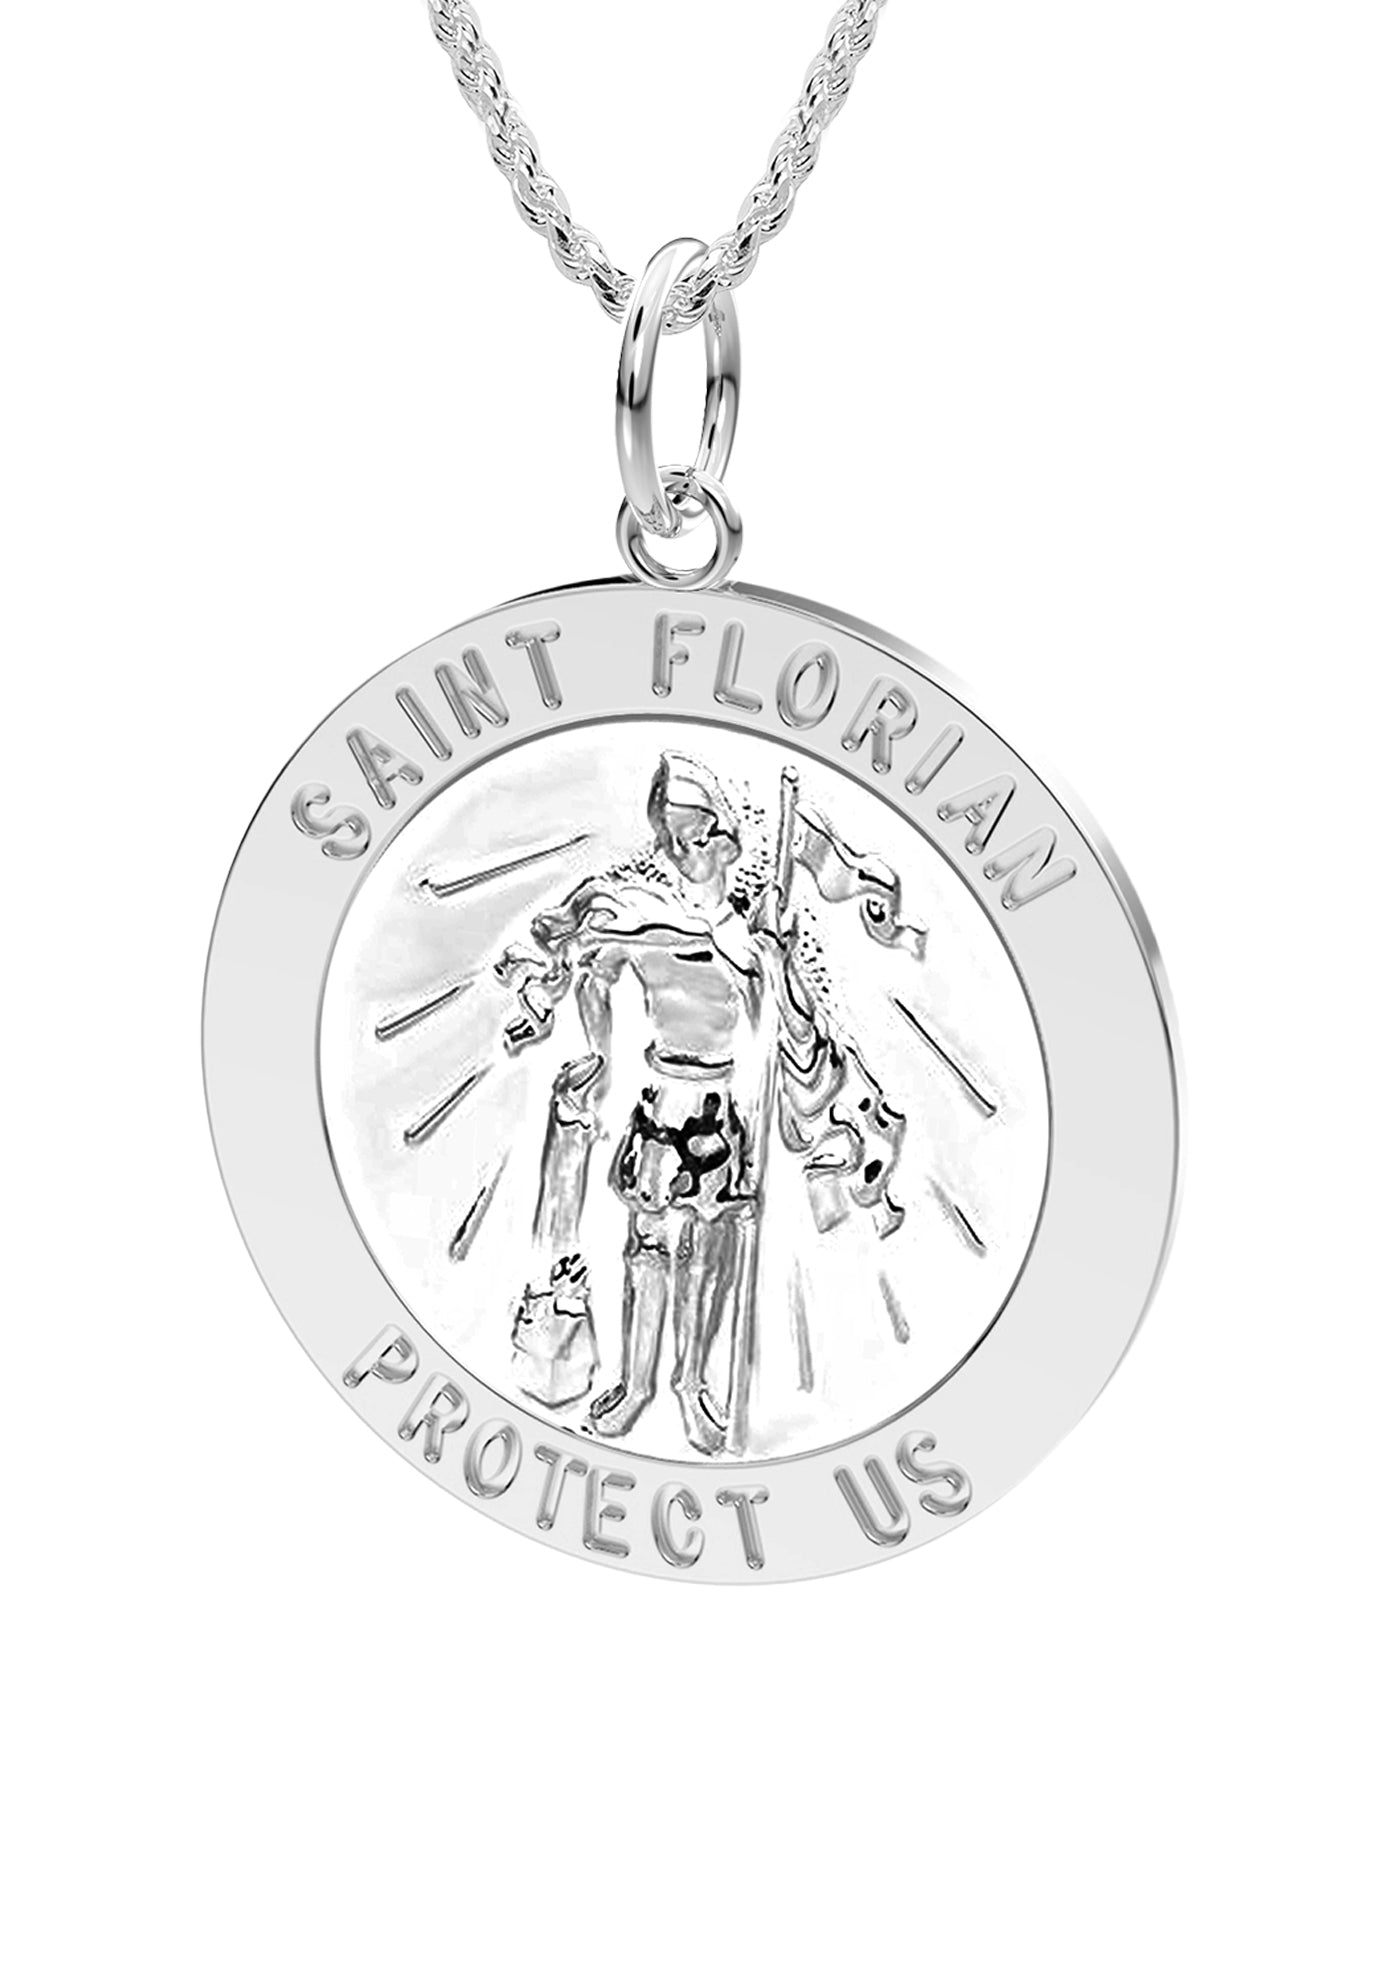 Ladies 925 Sterling Silver Saint Florian Round Polished Pendant Necklace, 18mm - US Jewels